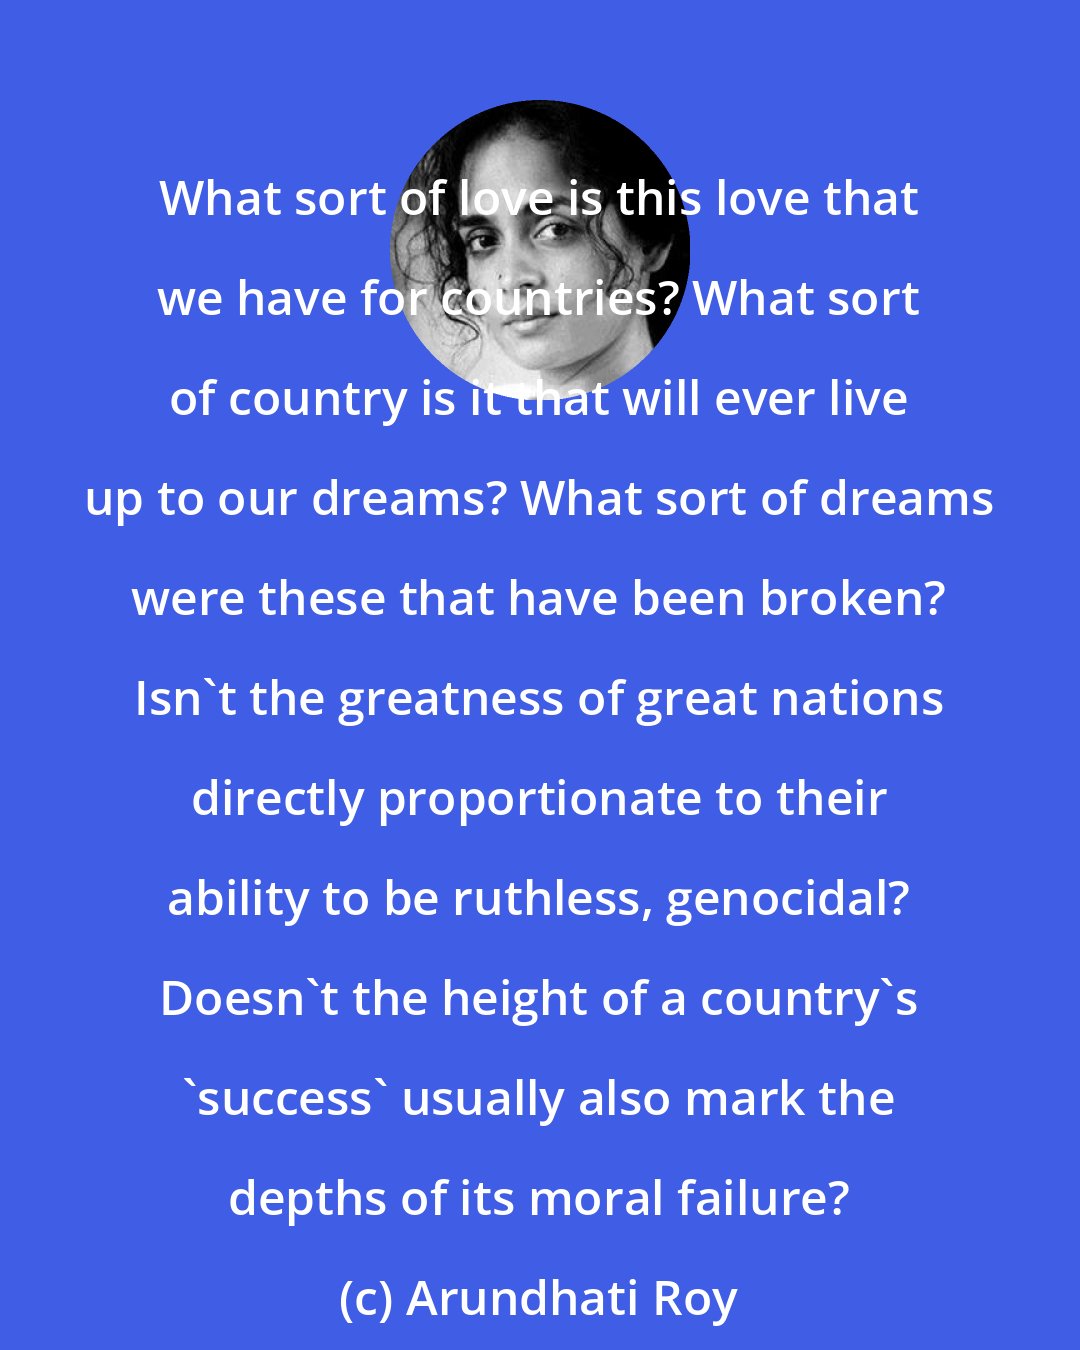 Arundhati Roy: What sort of love is this love that we have for countries? What sort of country is it that will ever live up to our dreams? What sort of dreams were these that have been broken? Isn't the greatness of great nations directly proportionate to their ability to be ruthless, genocidal? Doesn't the height of a country's 'success' usually also mark the depths of its moral failure?